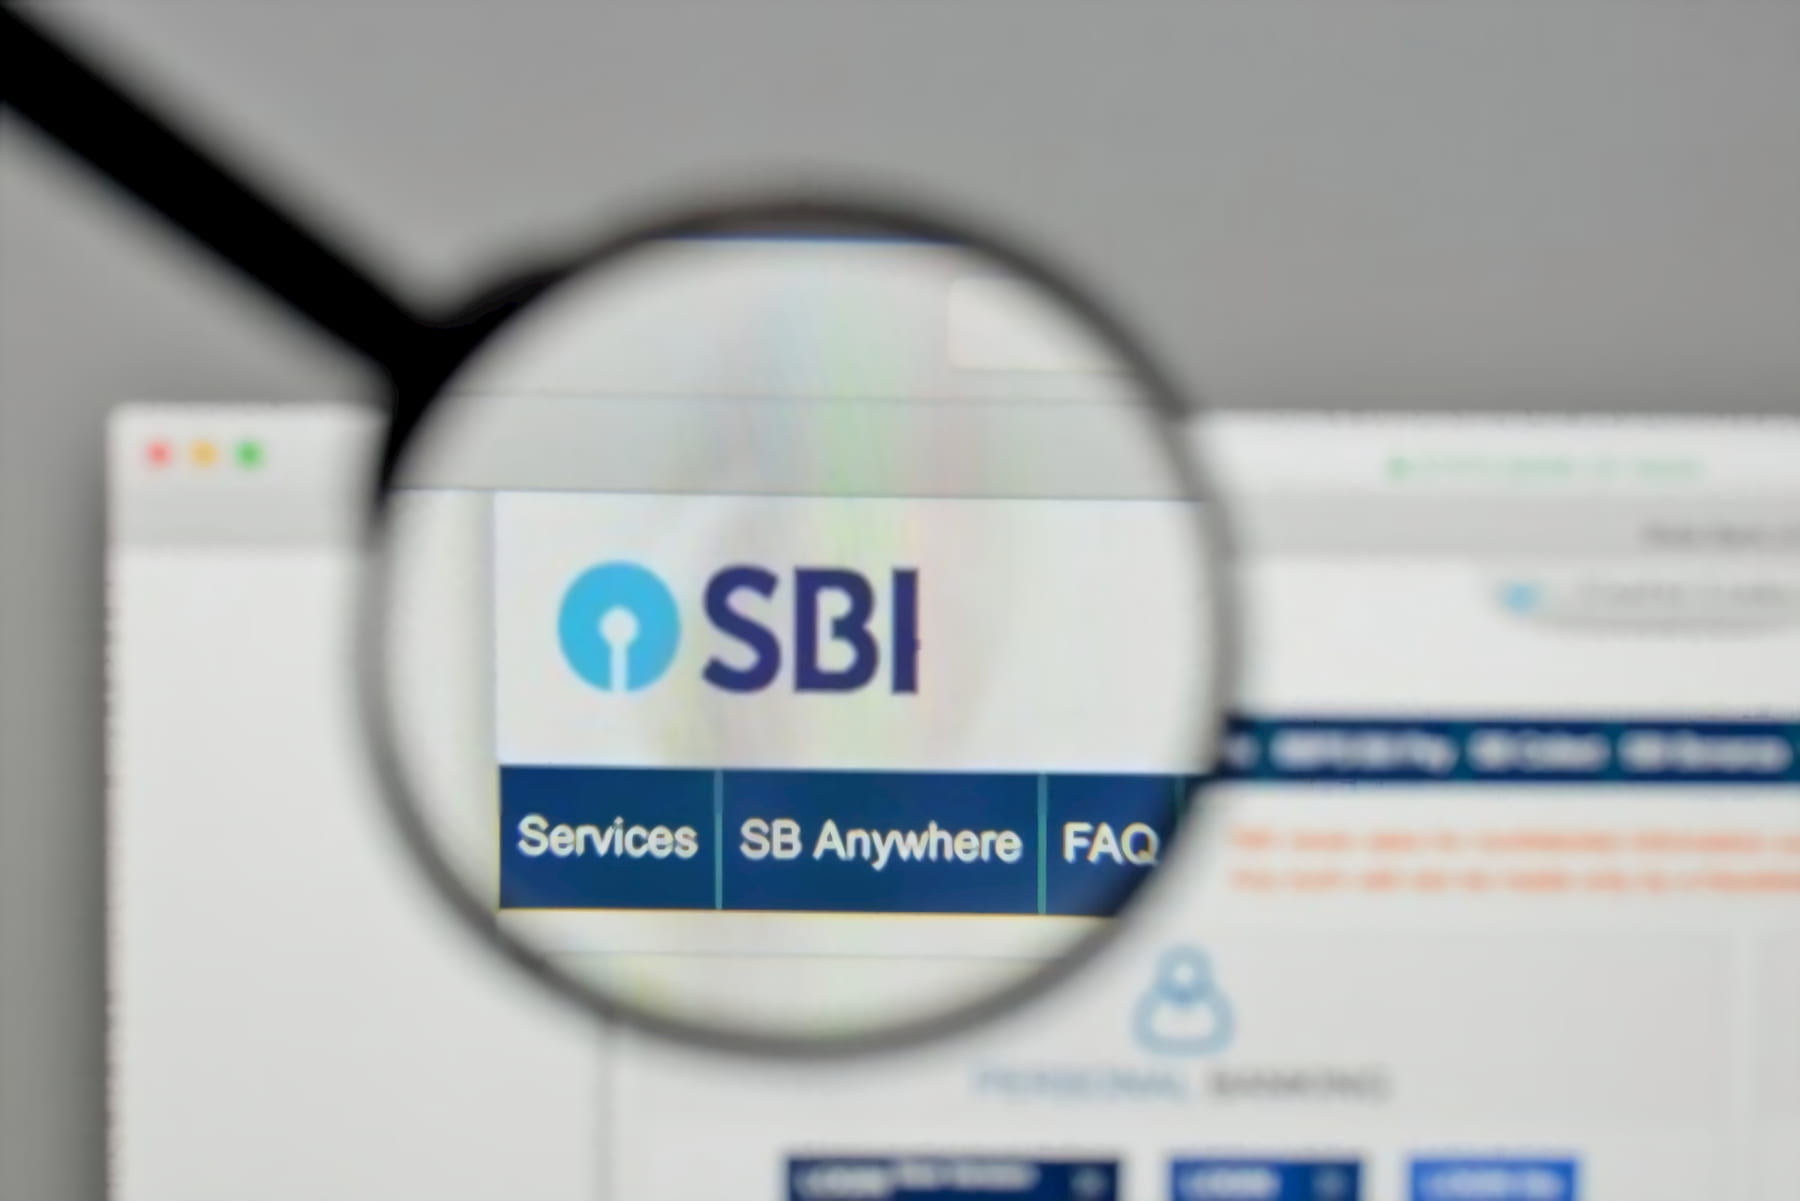 How to Find CIF Number in SBI Without Passbook